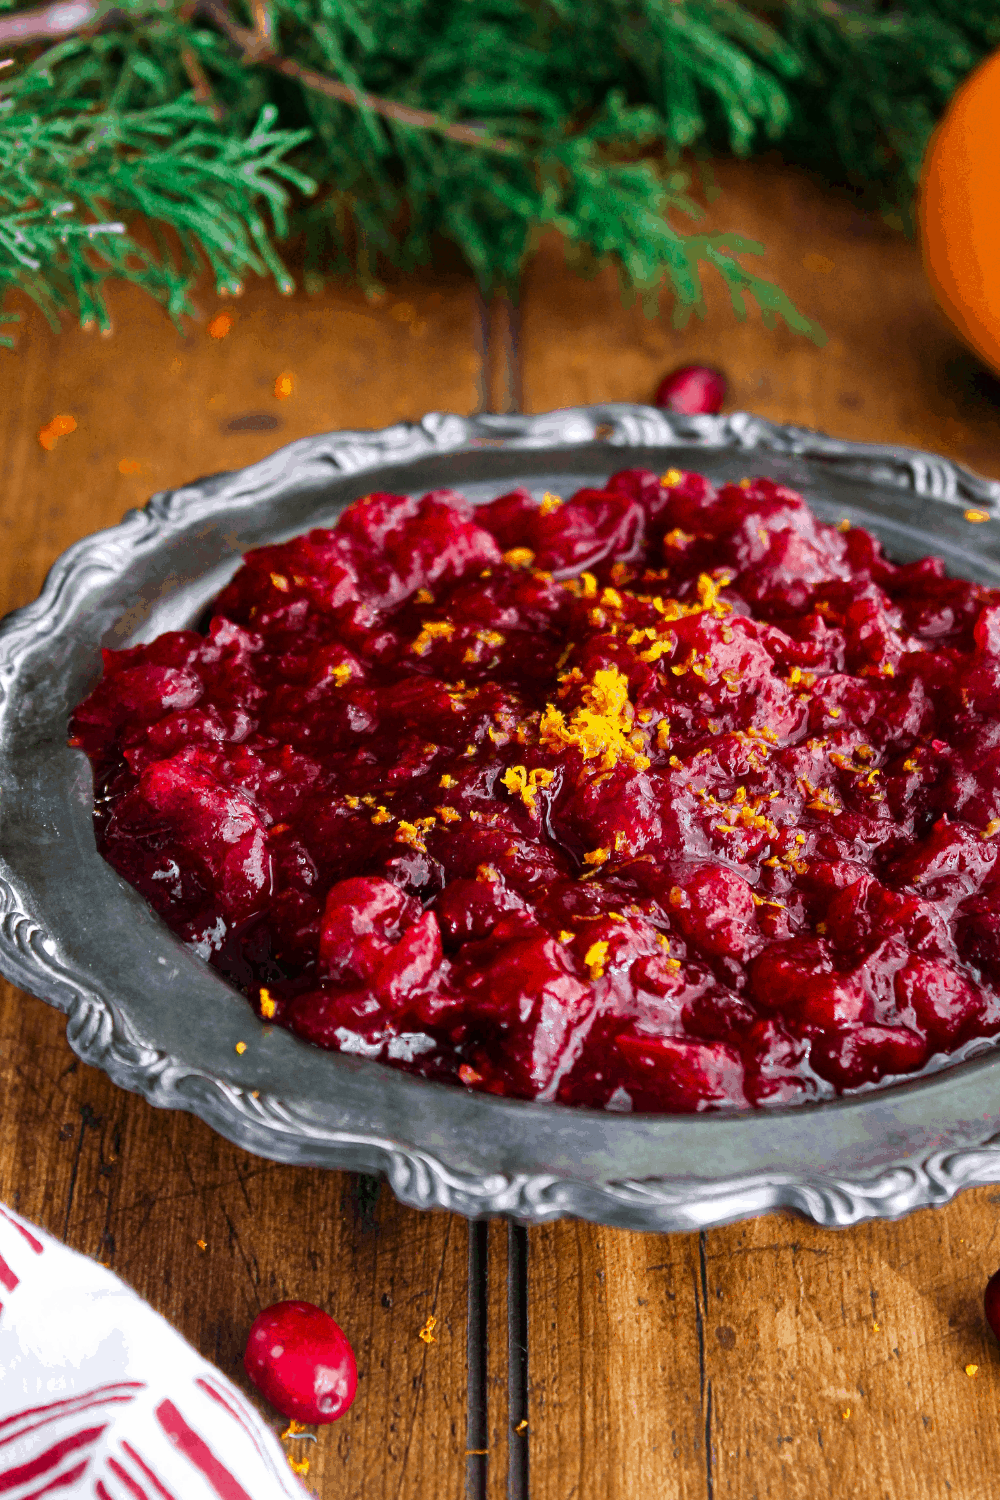 Cranberry sauce in bowl with greenery, cranberries, and an orange in the background.